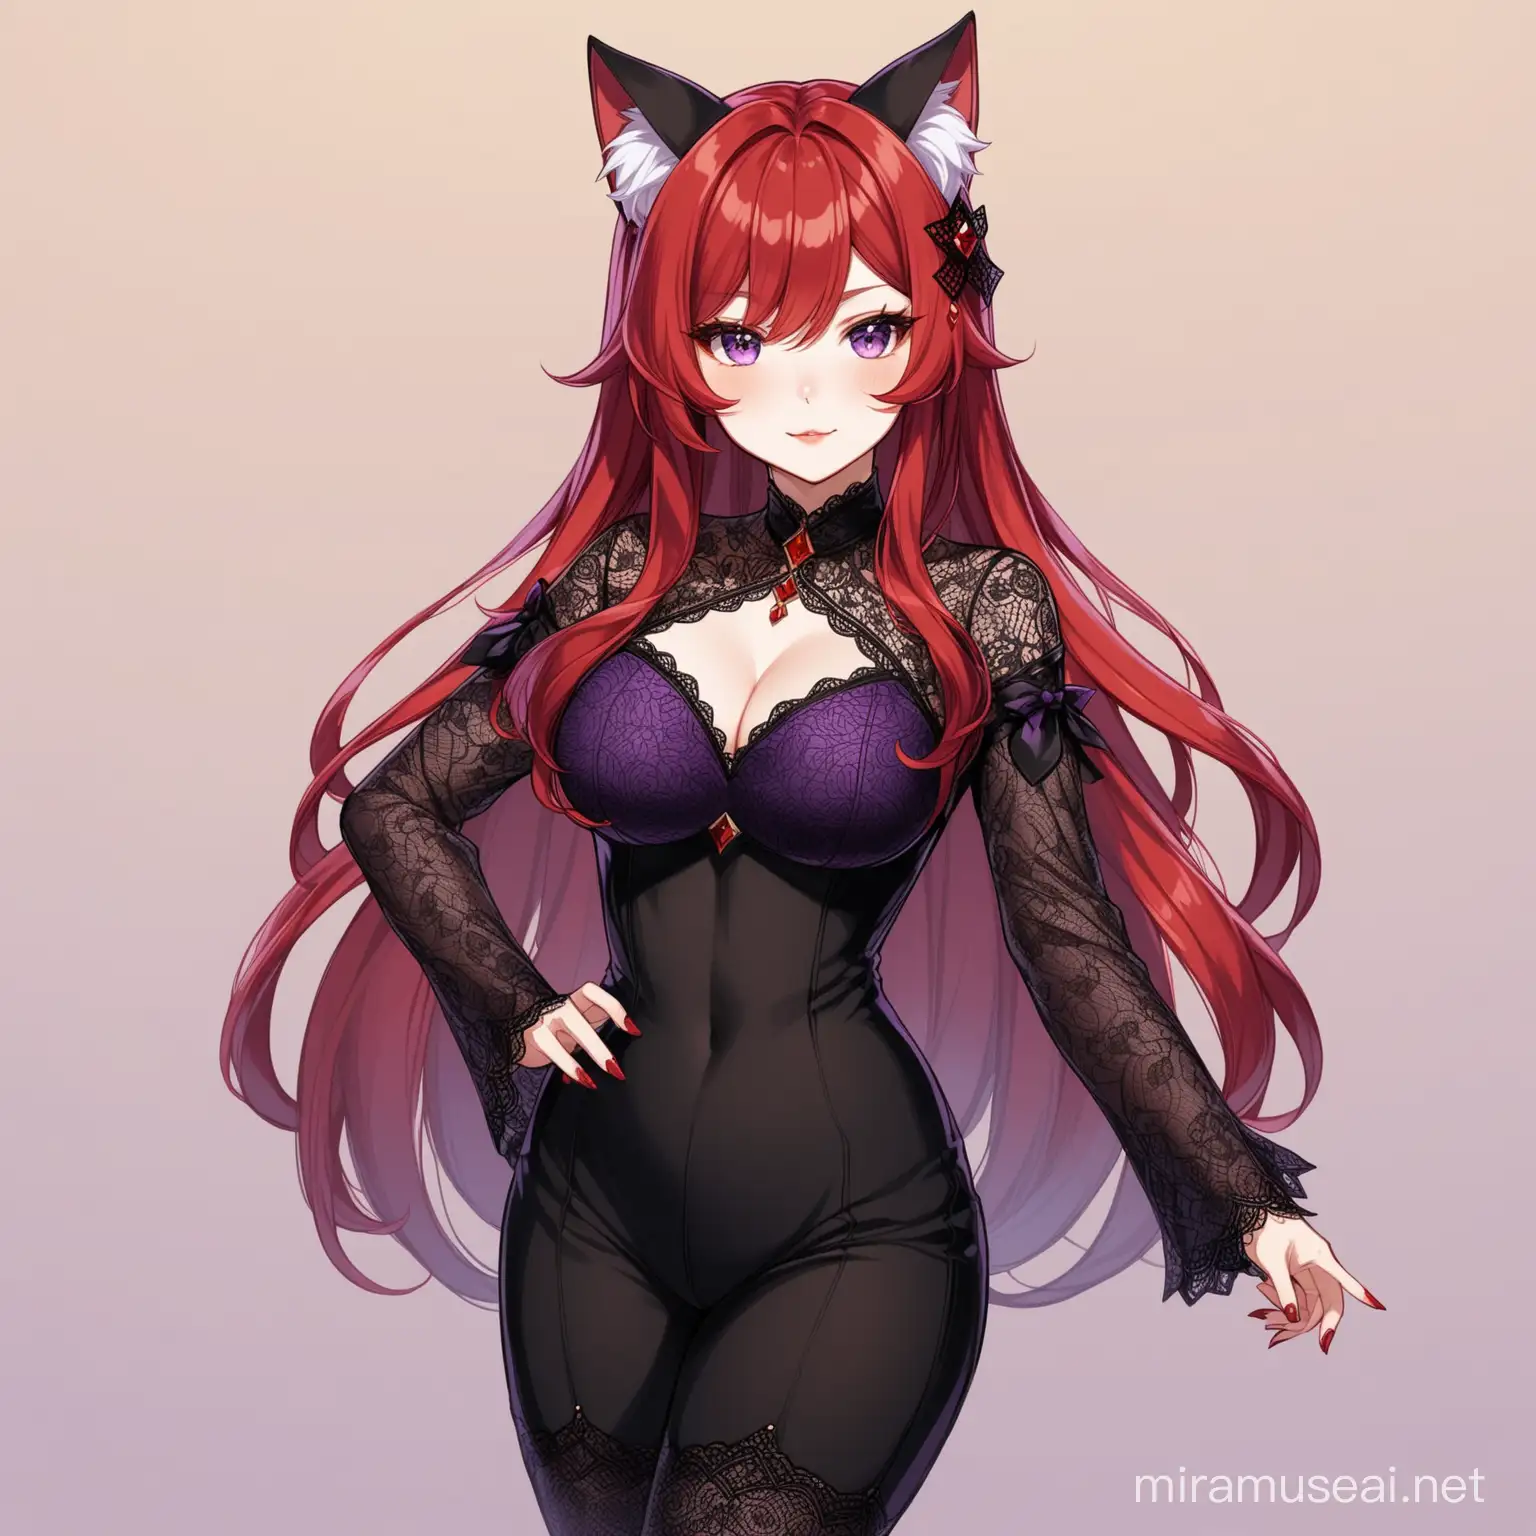 Mature Character with Red Cat Ears in Elegant Lace Outfit